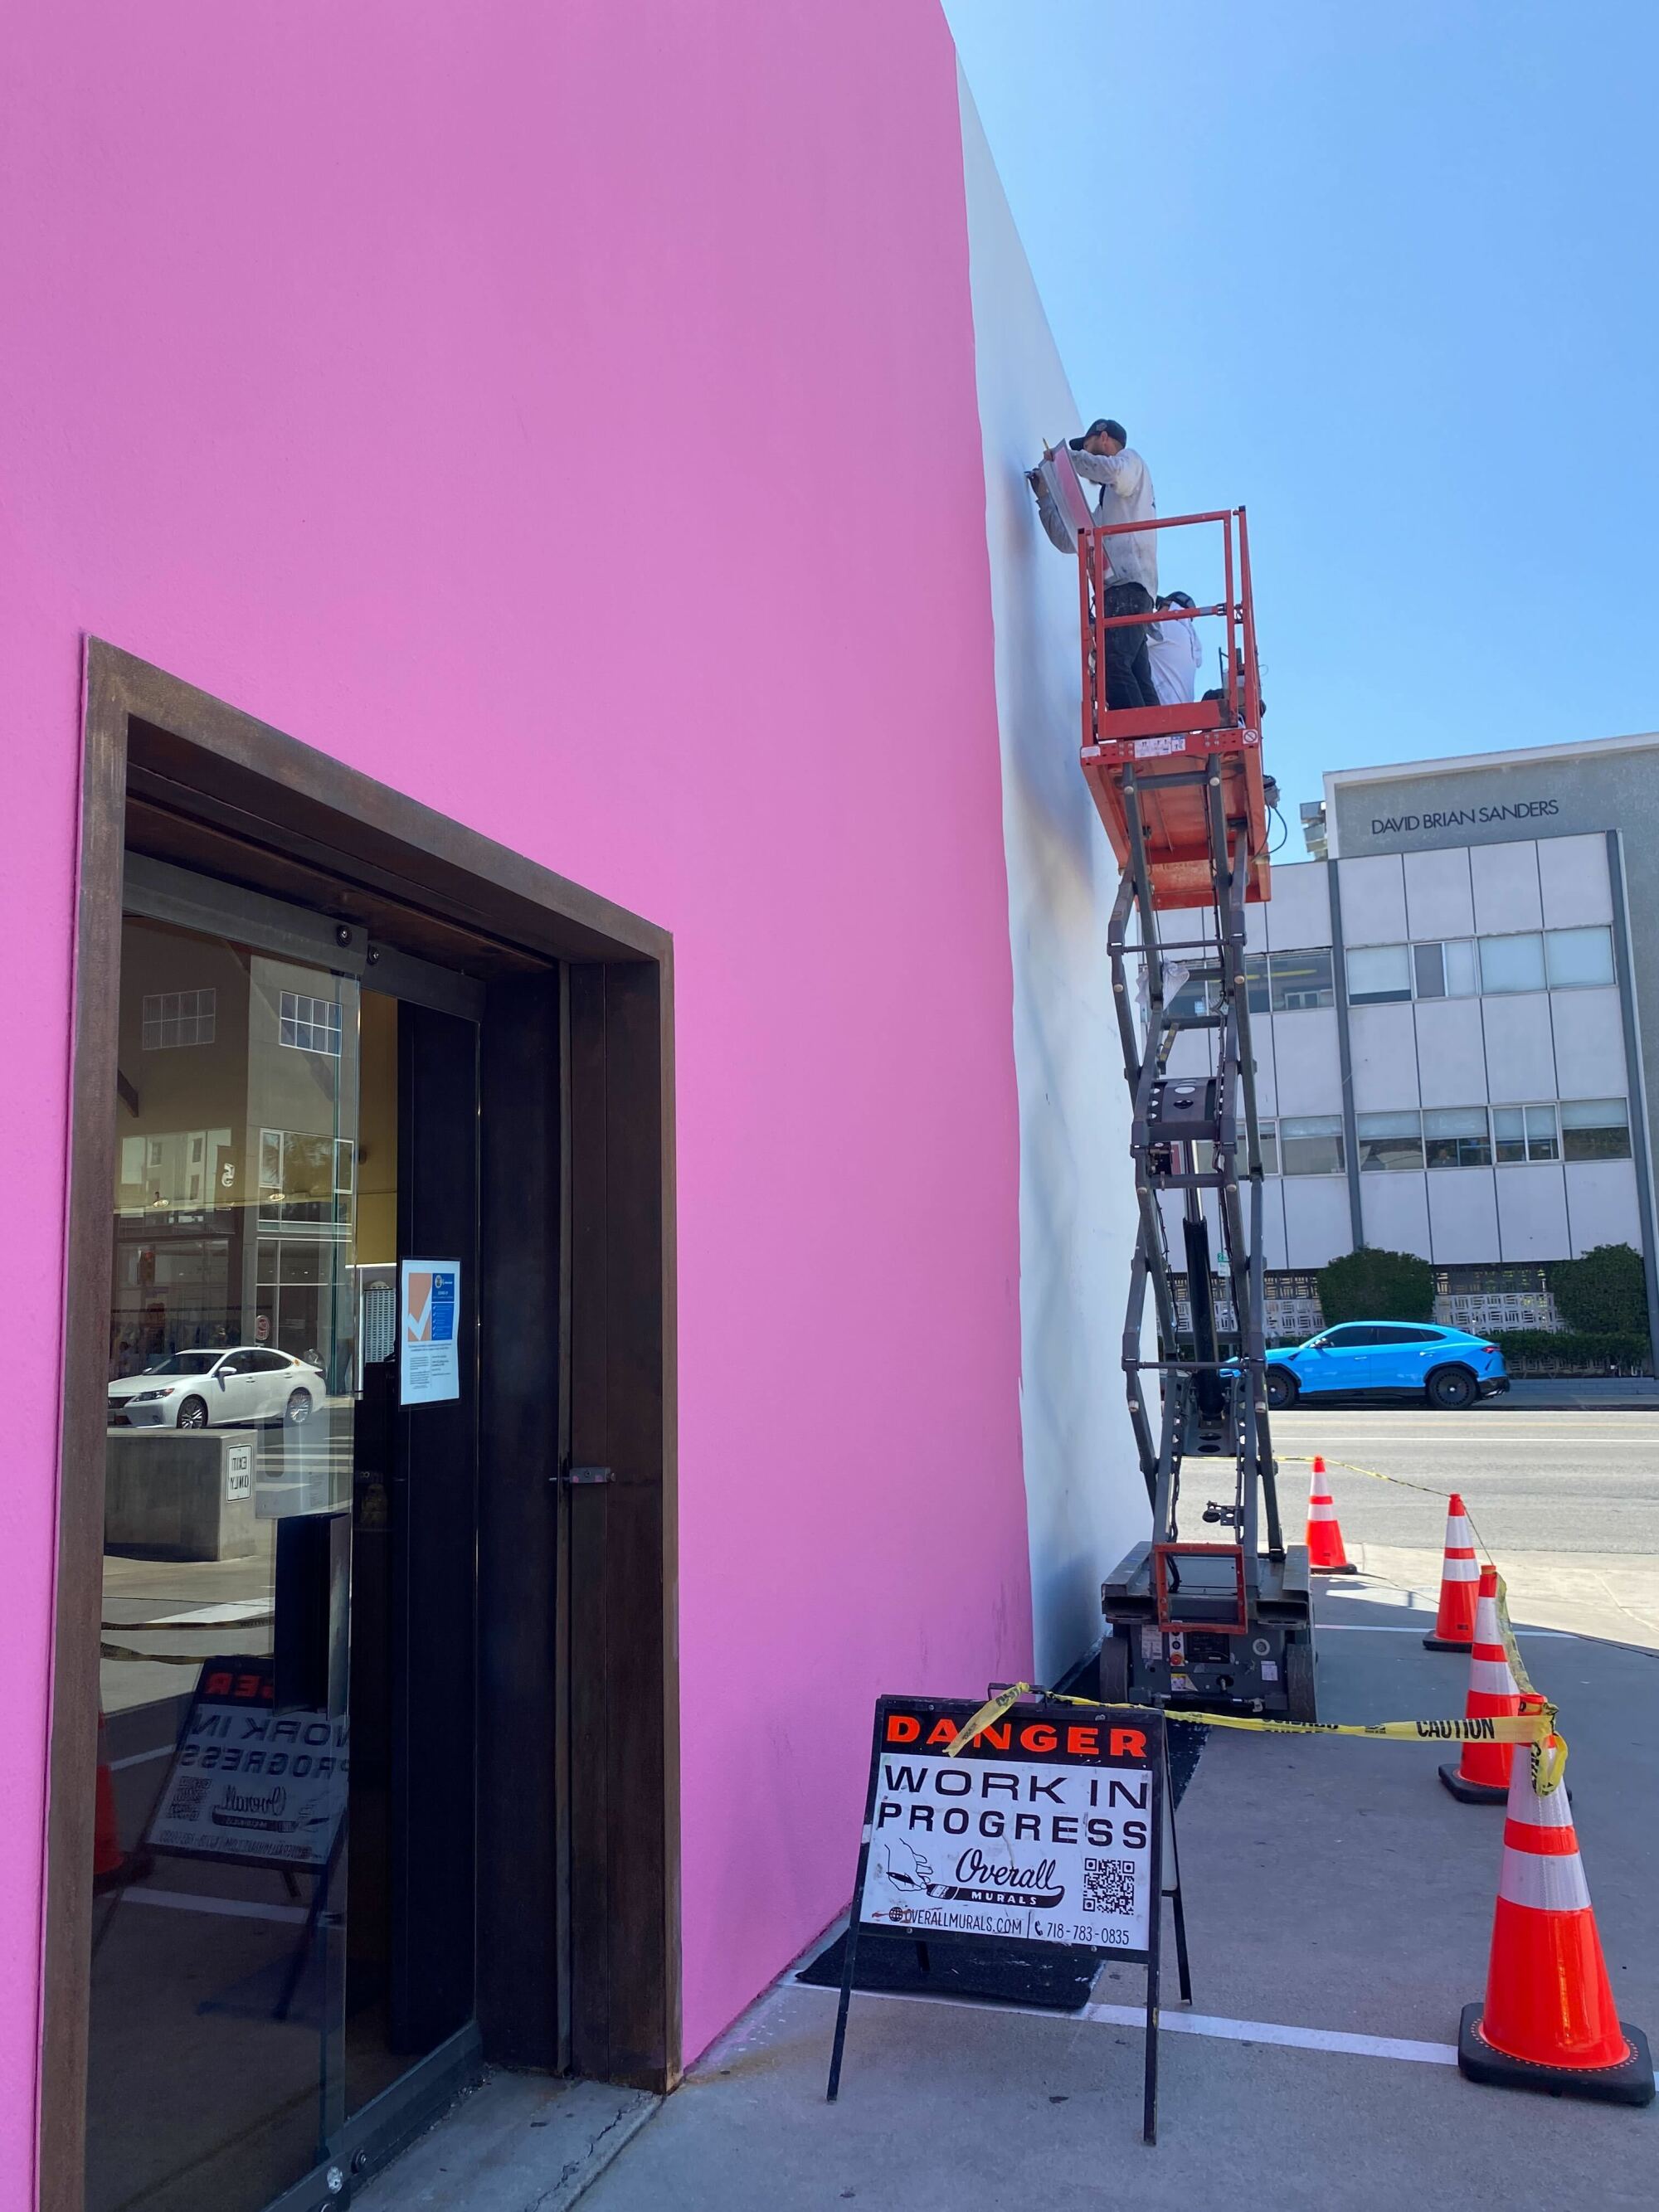 Painters next to a pink wall with a sign that says Danger: Work In Progress.